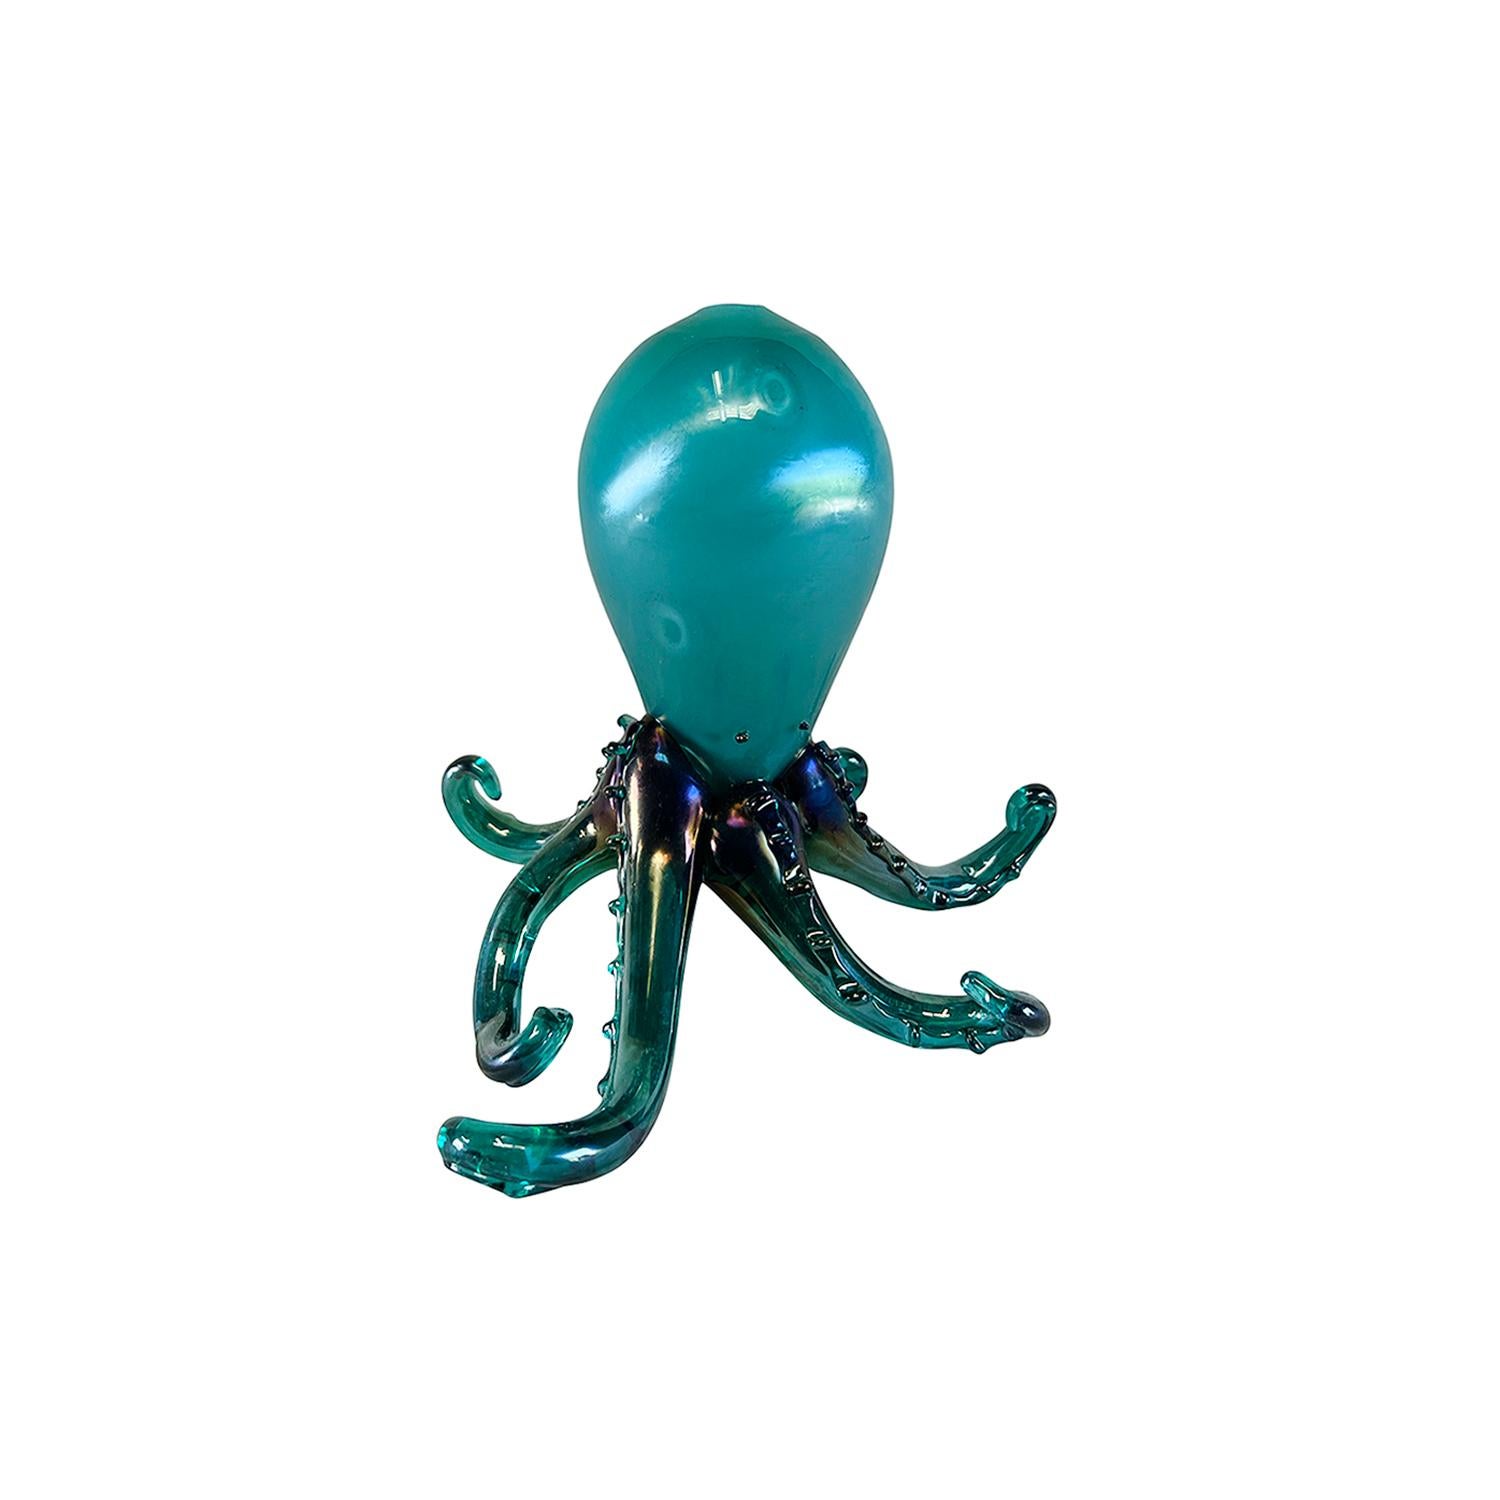 A turquoise-green, vintage Mid-Century modern Italian octopus sculpture made of hand blown colored Murano glass, designed by Carlo Scarpa and produced by M.V.M. Cappellin & Co. in good condition. Wear consistent with age and use. Dated 1929, Murano,